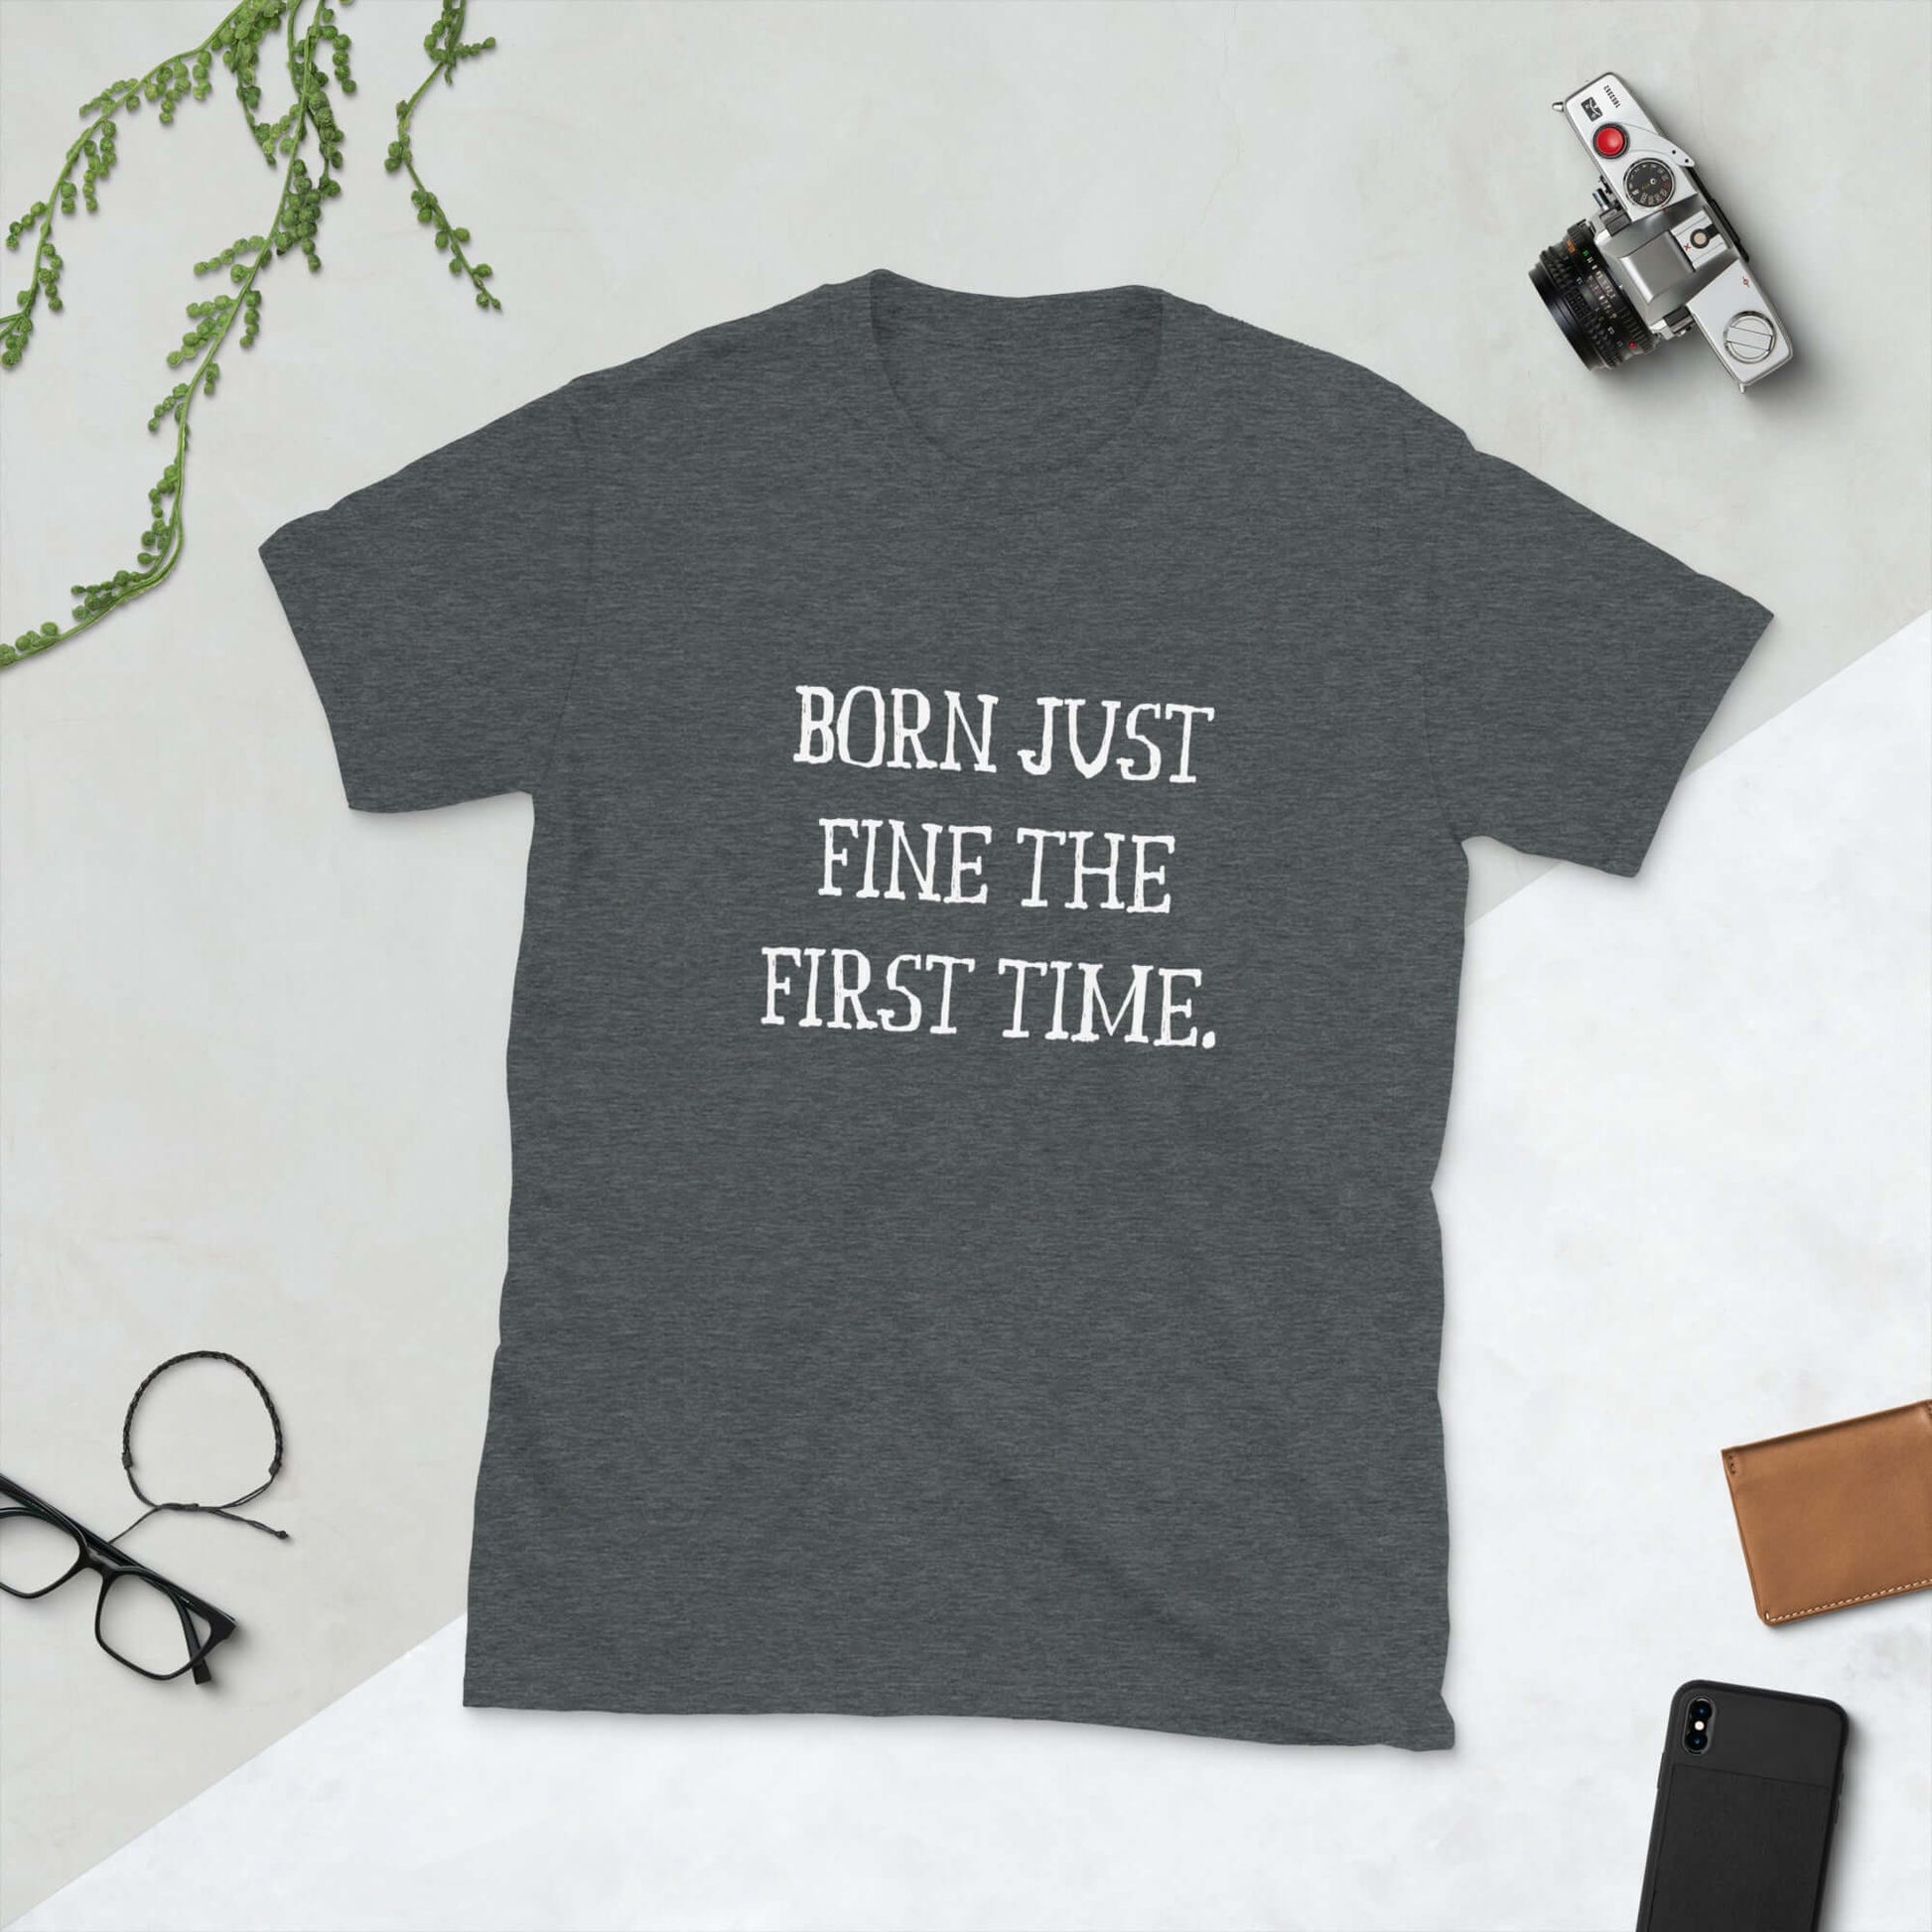 Dark grey t-shirt with the words Born just fine the first time printed on the front.